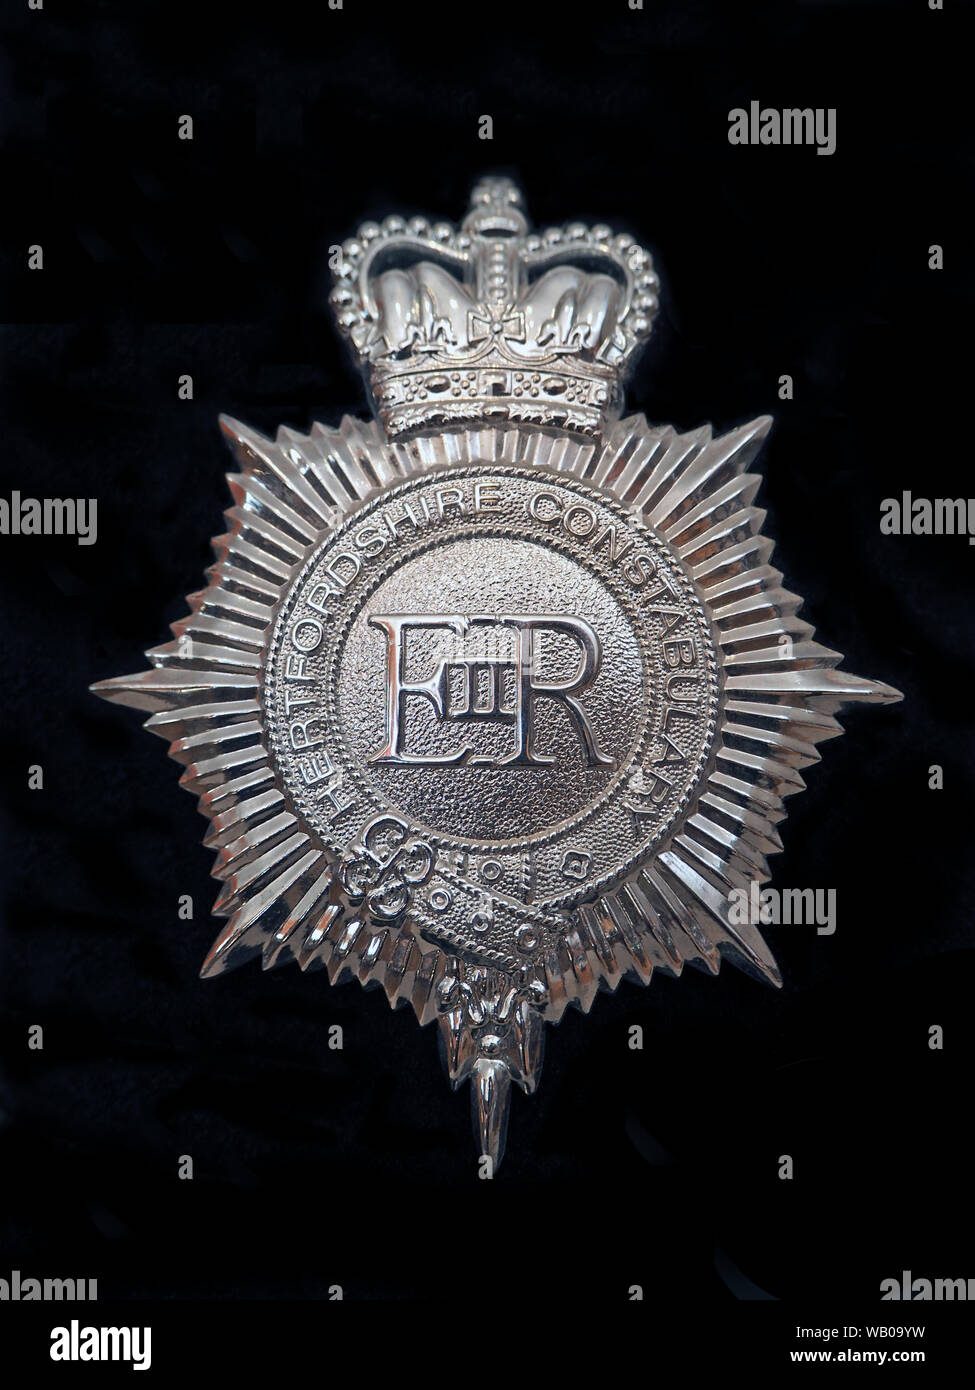 Hertfordshire Constabulary badge casque Police Banque D'Images